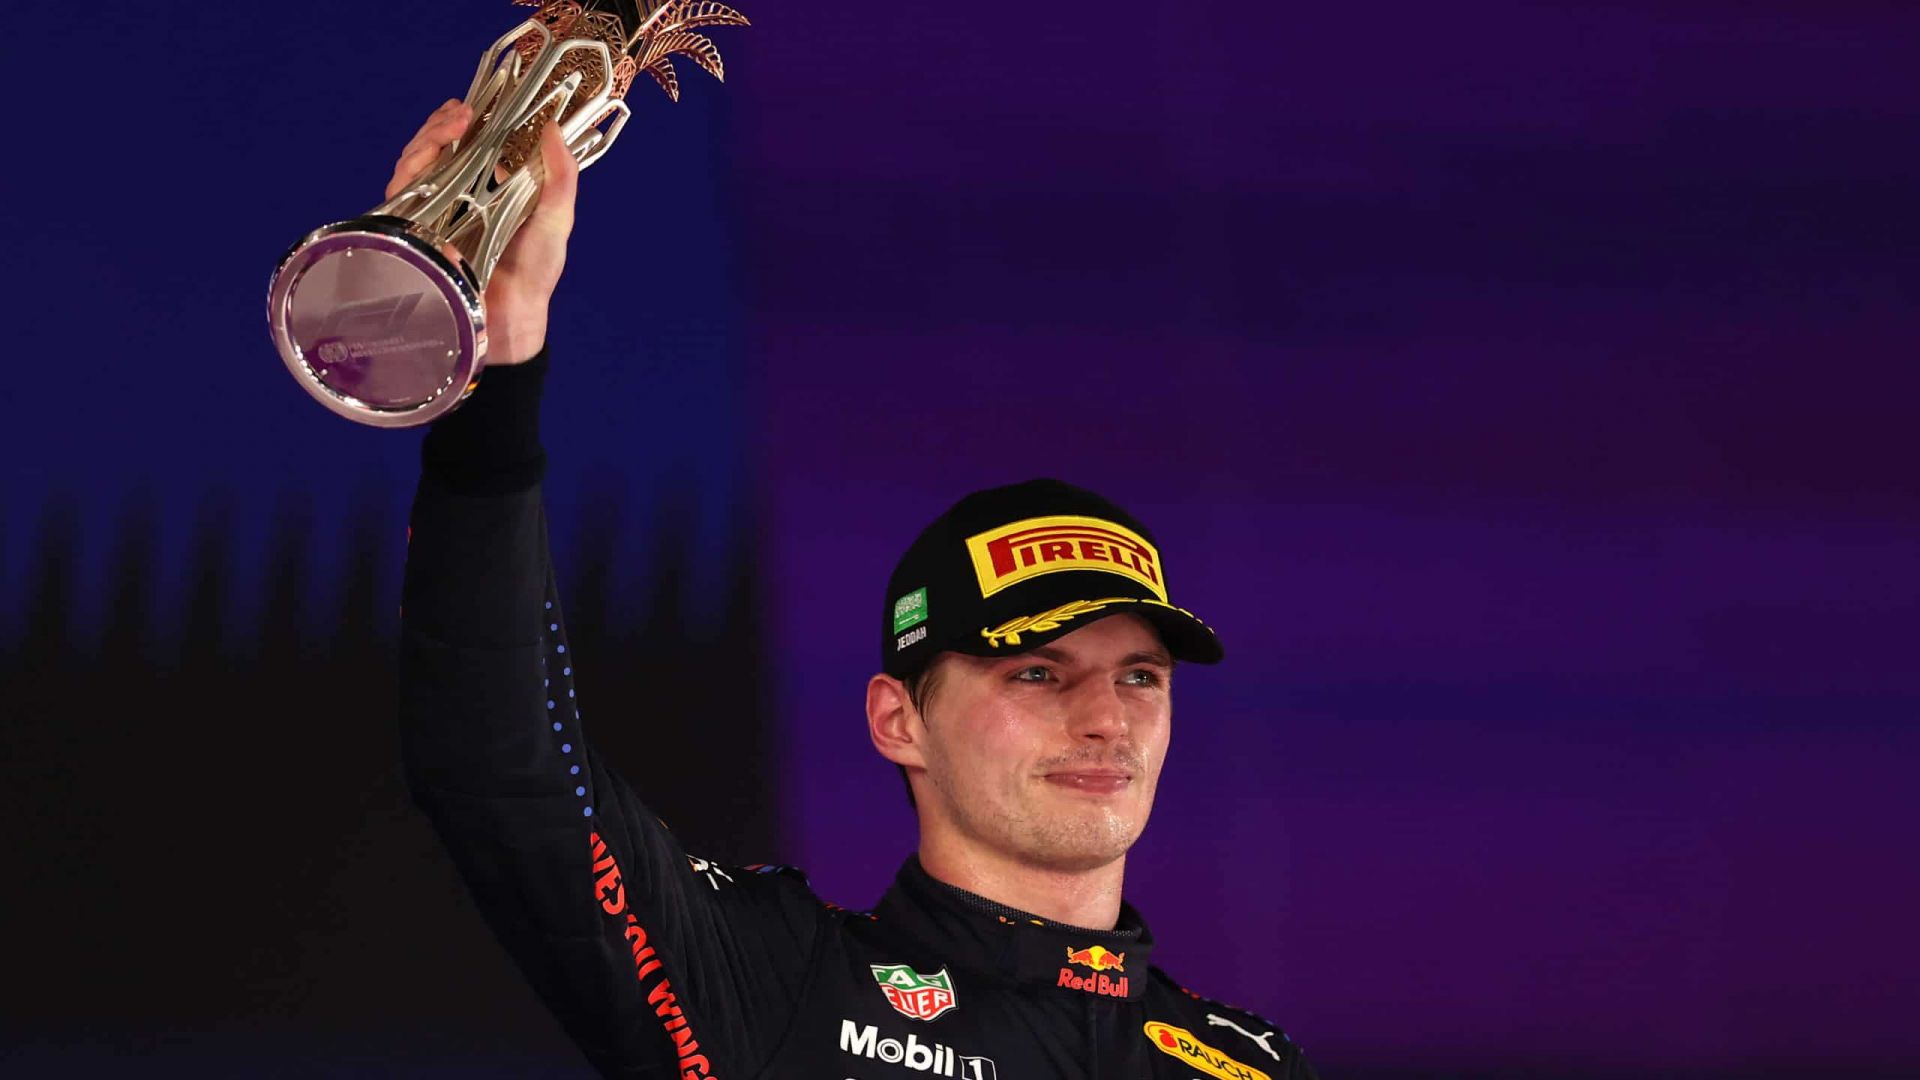 JEDDAH, SAUDI ARABIA - DECEMBER 05: Second placed Max Verstappen of Netherlands and Red Bull Racing celebrates on the podium during the F1 Grand Prix of Saudi Arabia at Jeddah Corniche Circuit on December 05, 2021 in Jeddah, Saudi Arabia. (Photo by Lars Baron/Getty Images) // Getty Images / Red Bull Content Pool // SI202112050278 // Usage for editorial use only //